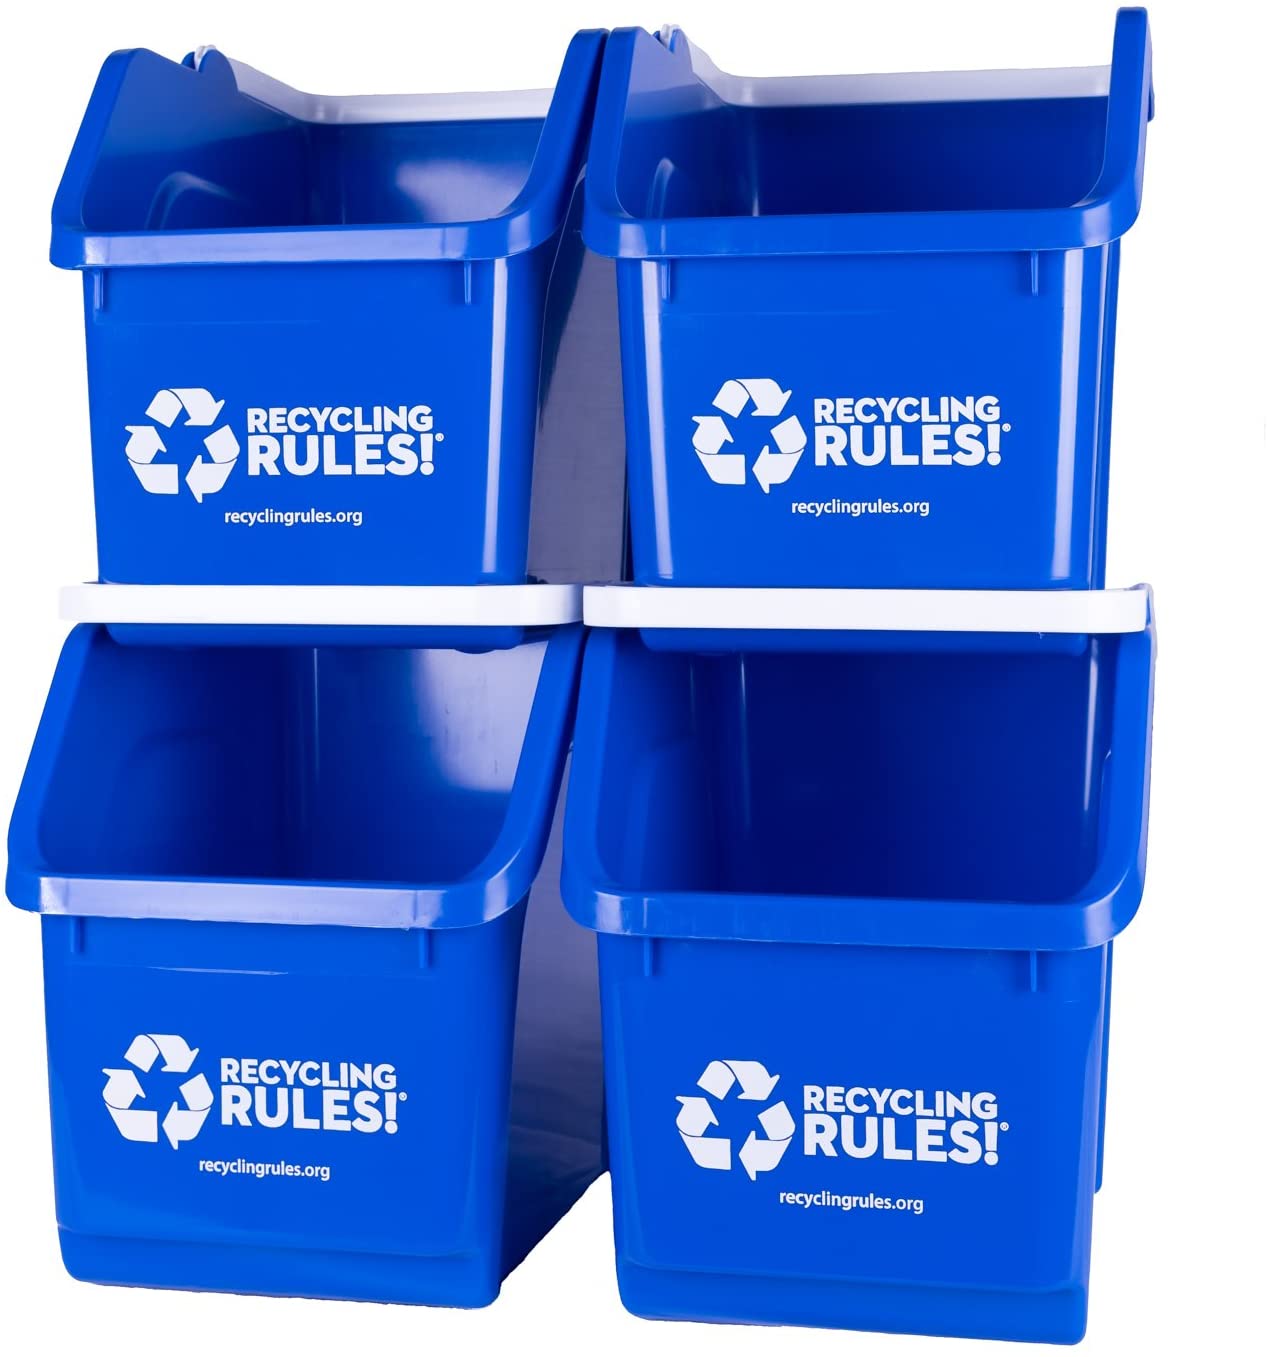 Recycling Rules Plastic Recycling Bins, 4-Piece